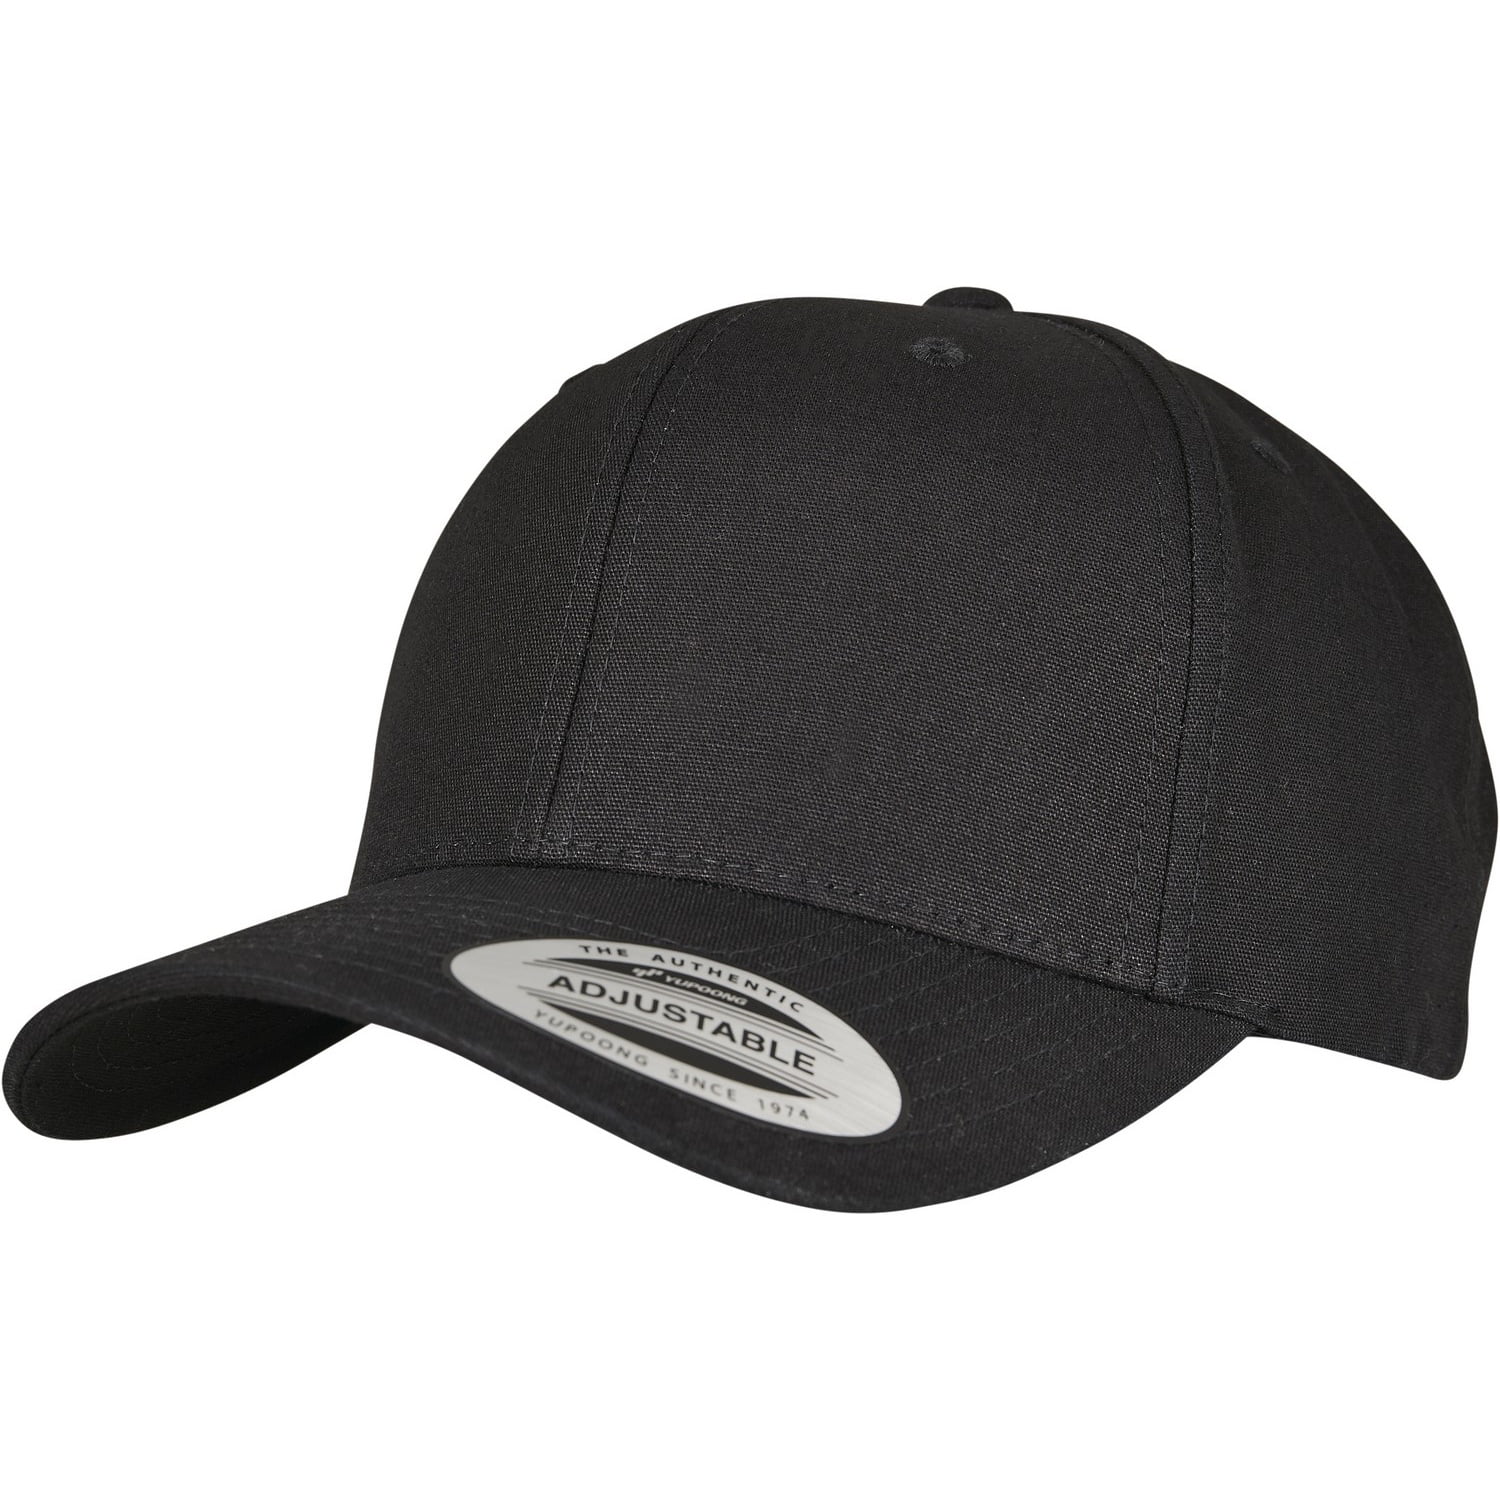 By 6 Curved Snap Panel Cap Yupoong Metal Flexfit